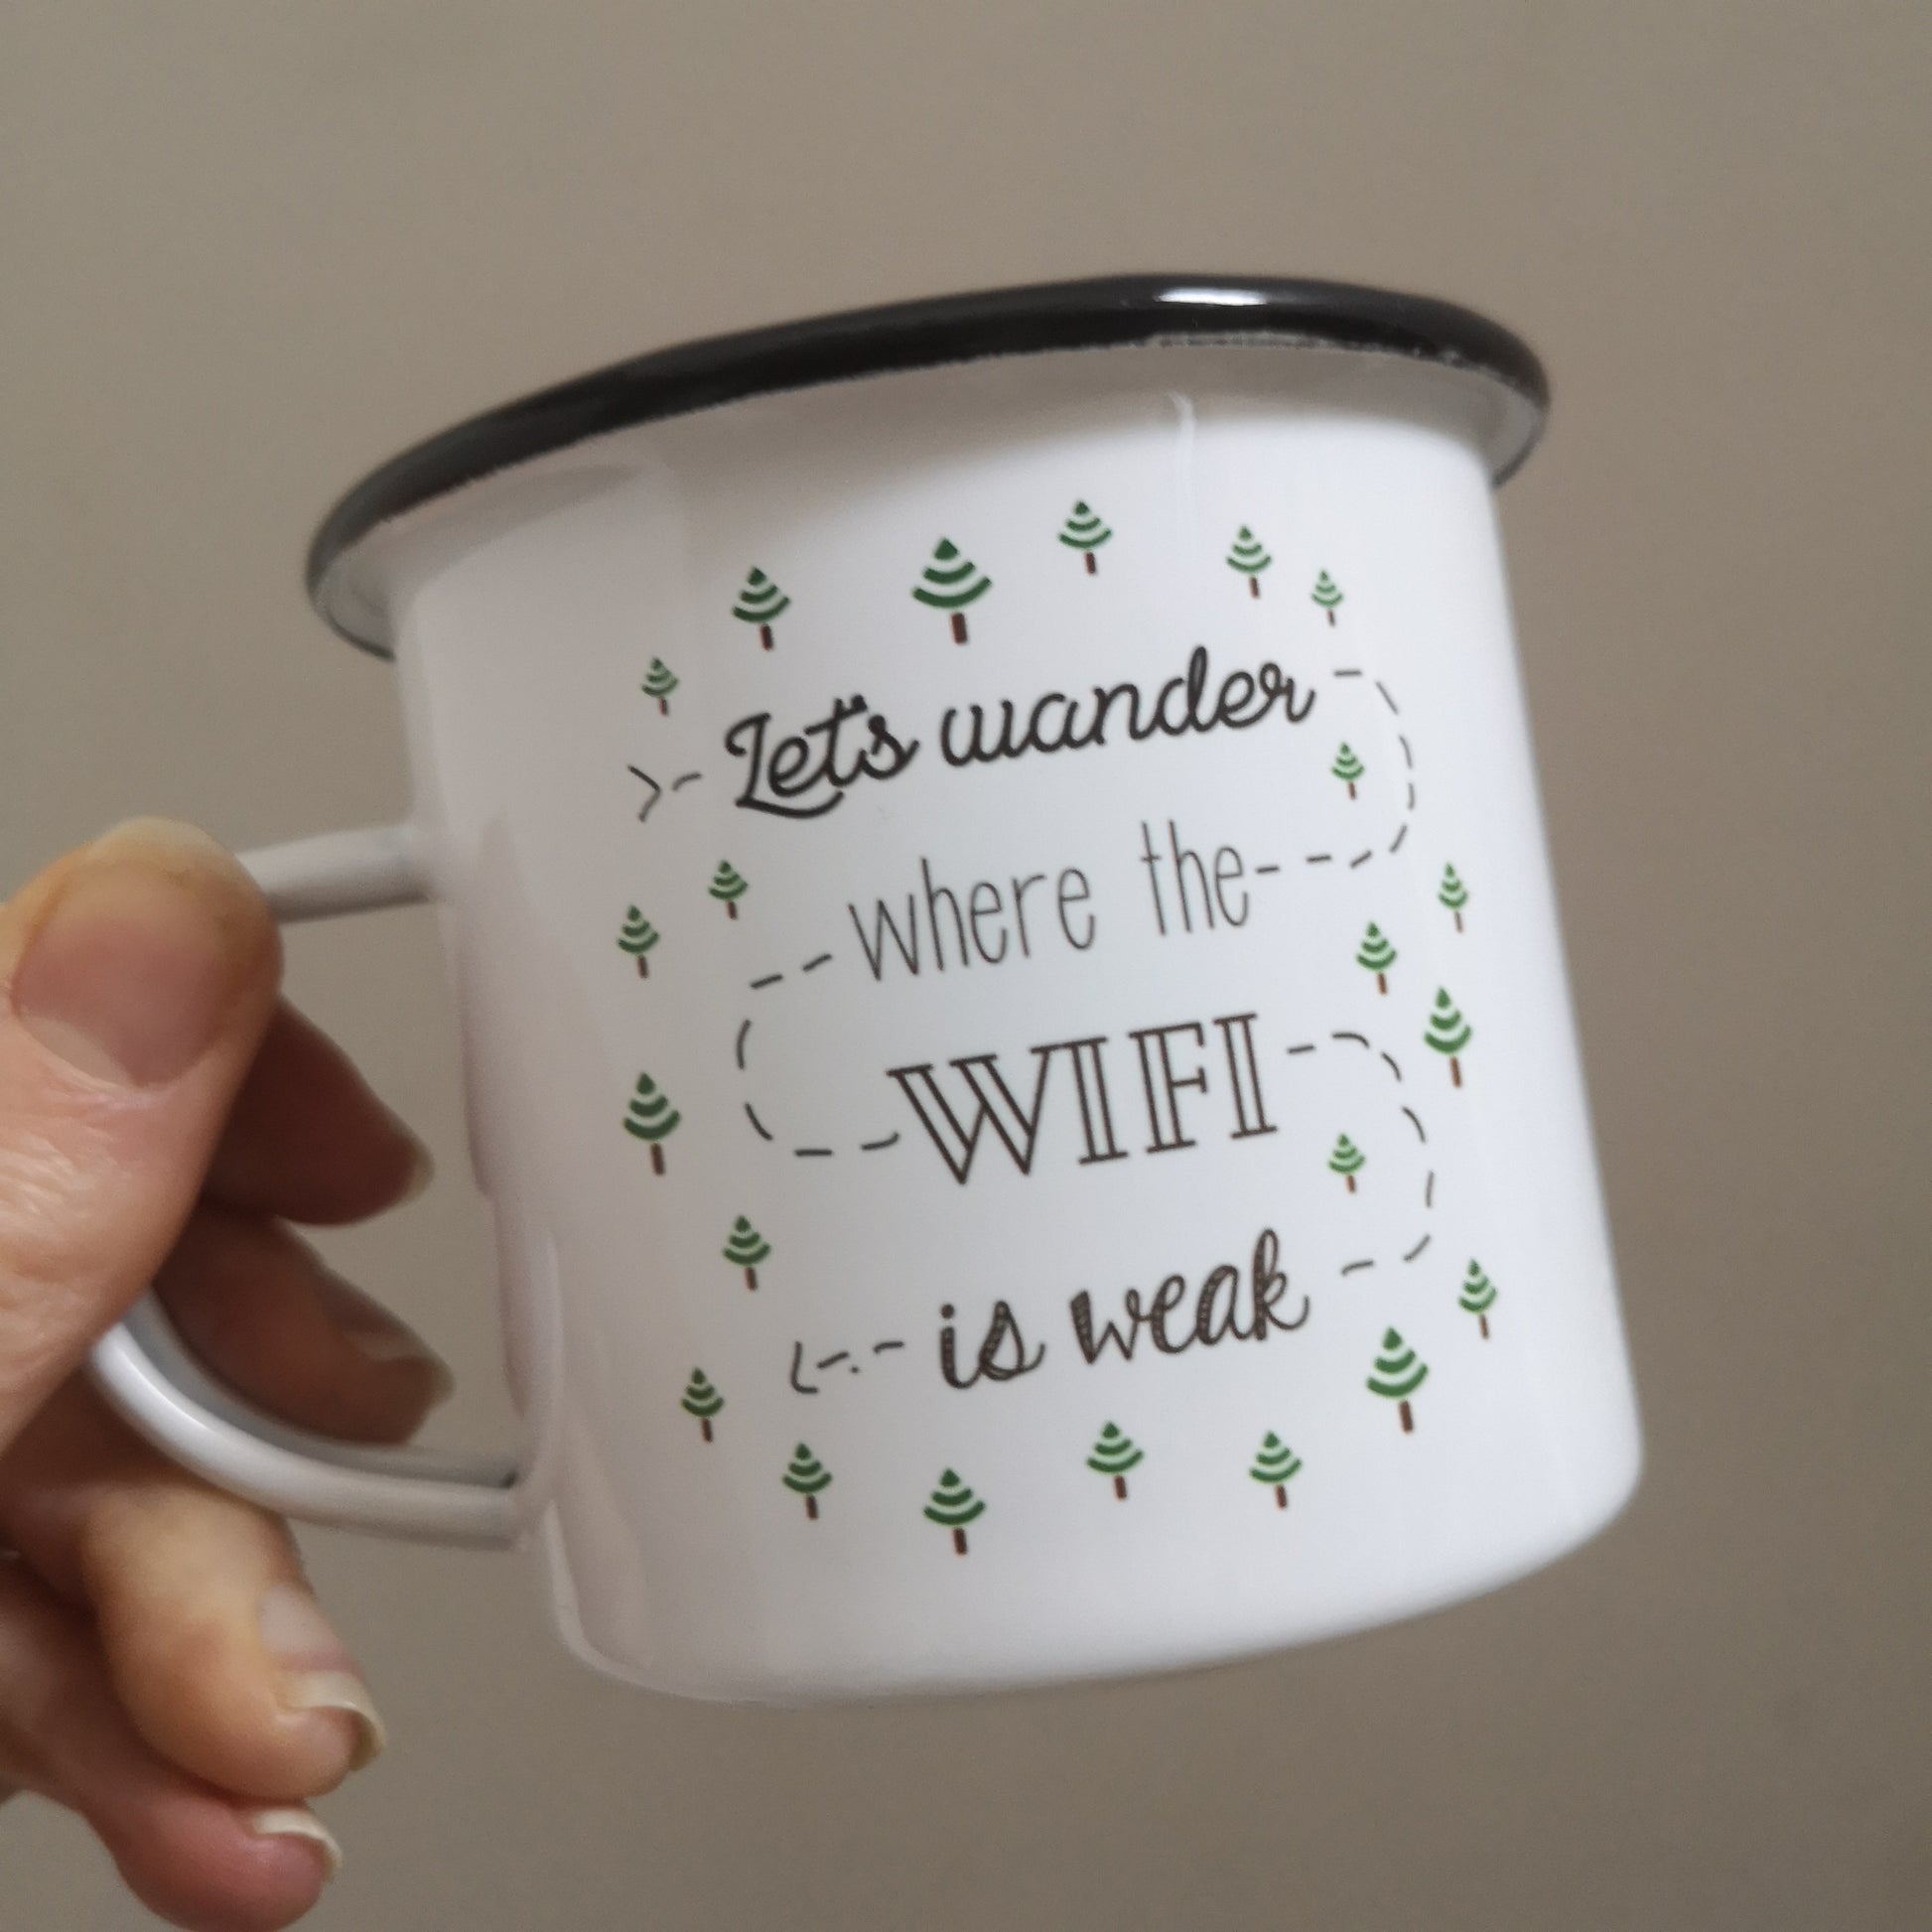 Another angle of a White enamel mug with a black rim with the following on the front - 'Let's wander where the WIFI is weak' and lots of little trees that are upside down wifi signals